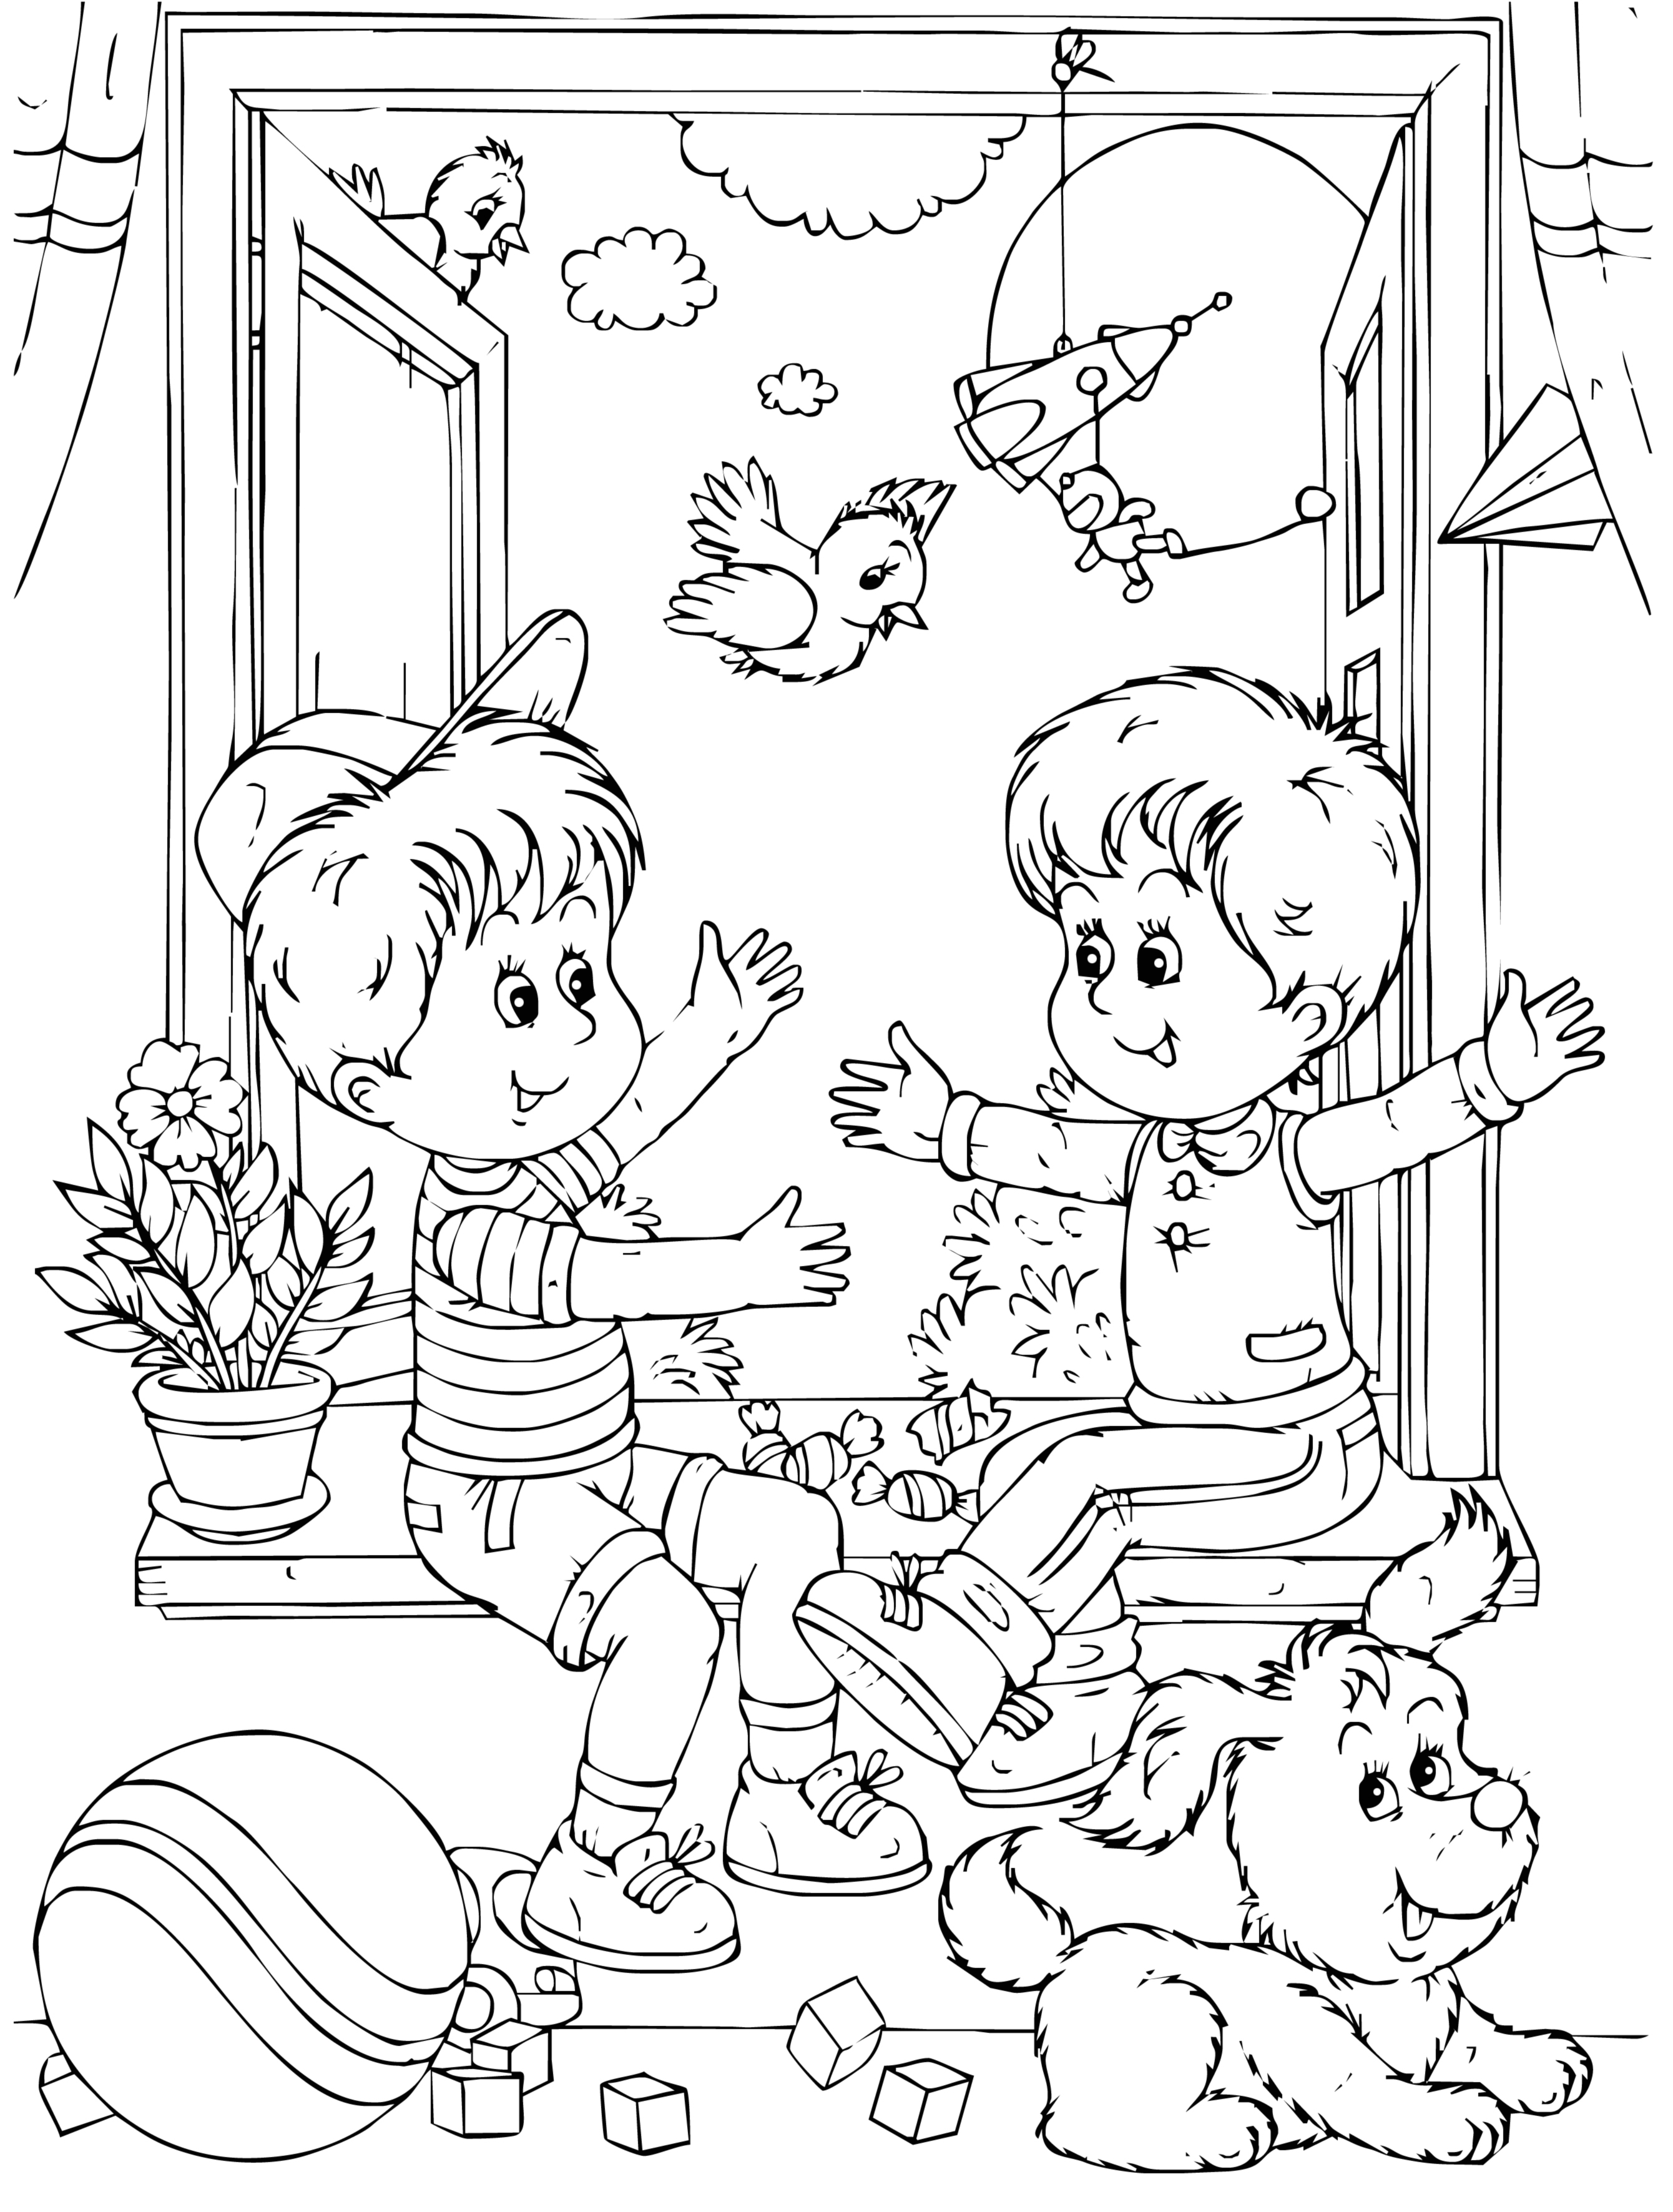 Amazing Friendship Coloring Pages  Don t miss out 